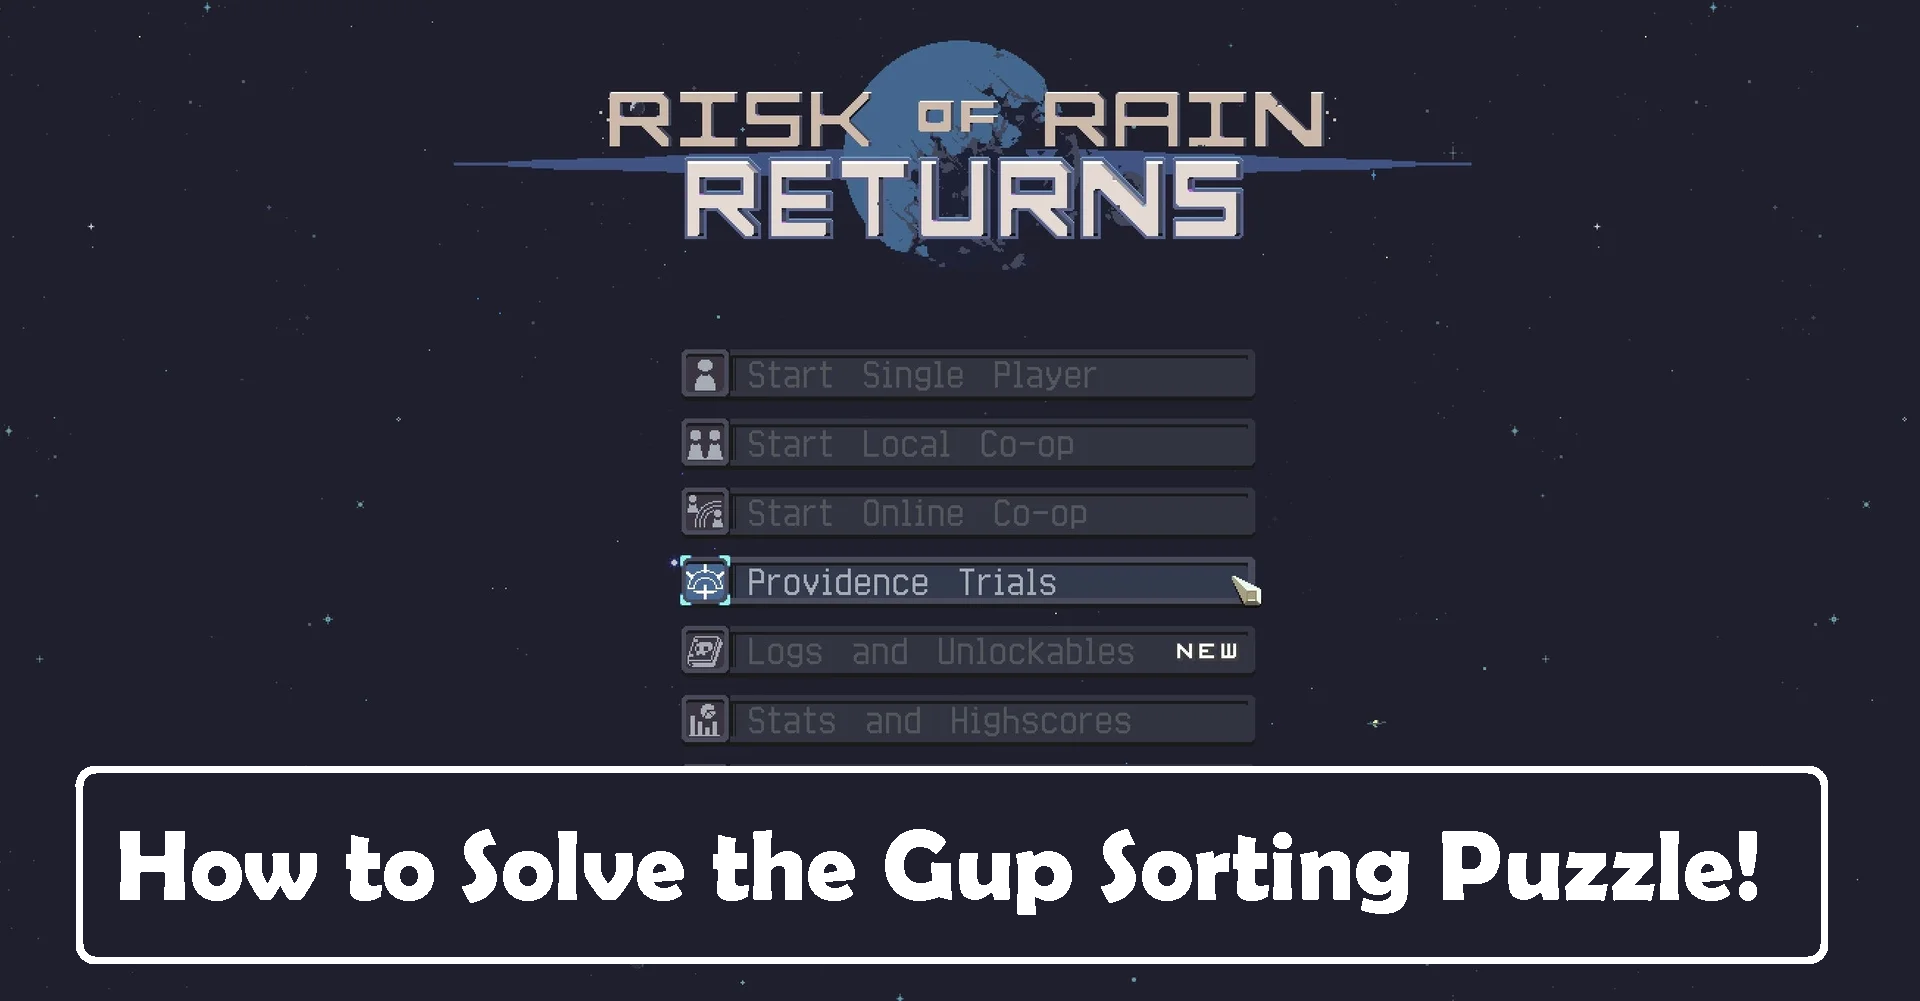 How to Complete the Gup Sorting Puzzle in Risk of Rain Returns